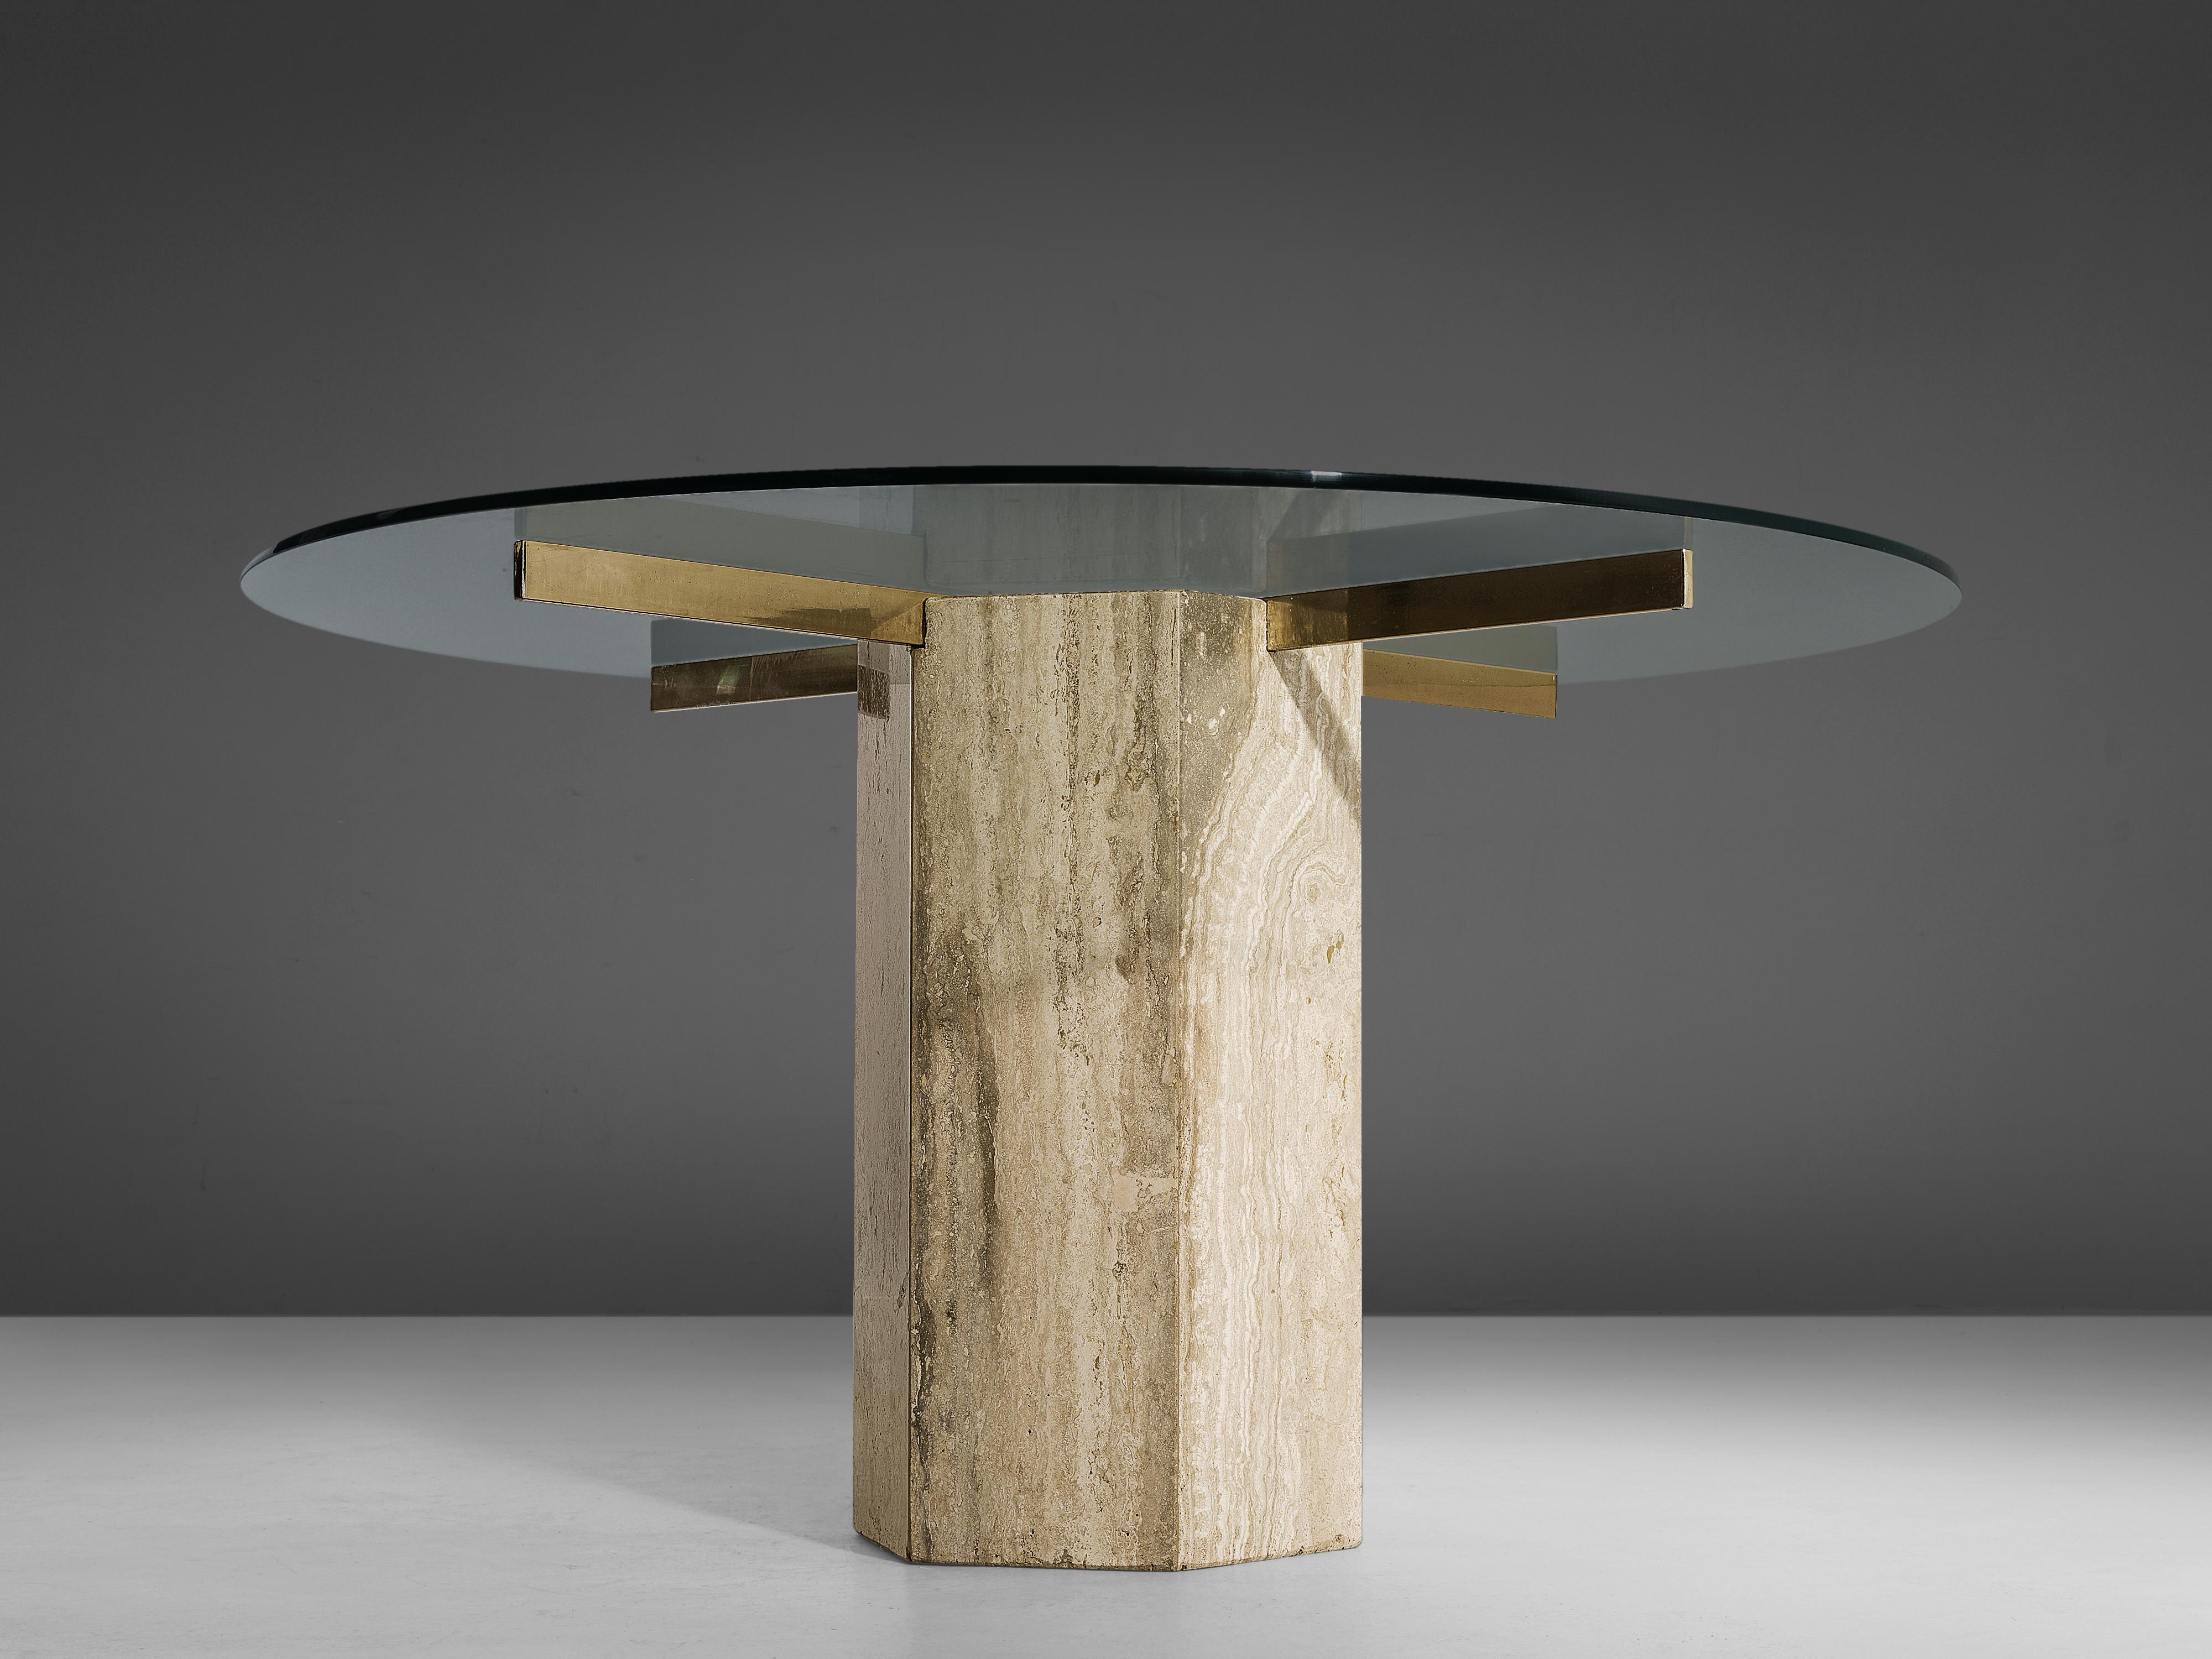 Mid-Century Modern Round Italian Dining Table in Travertine, Brass and Glass